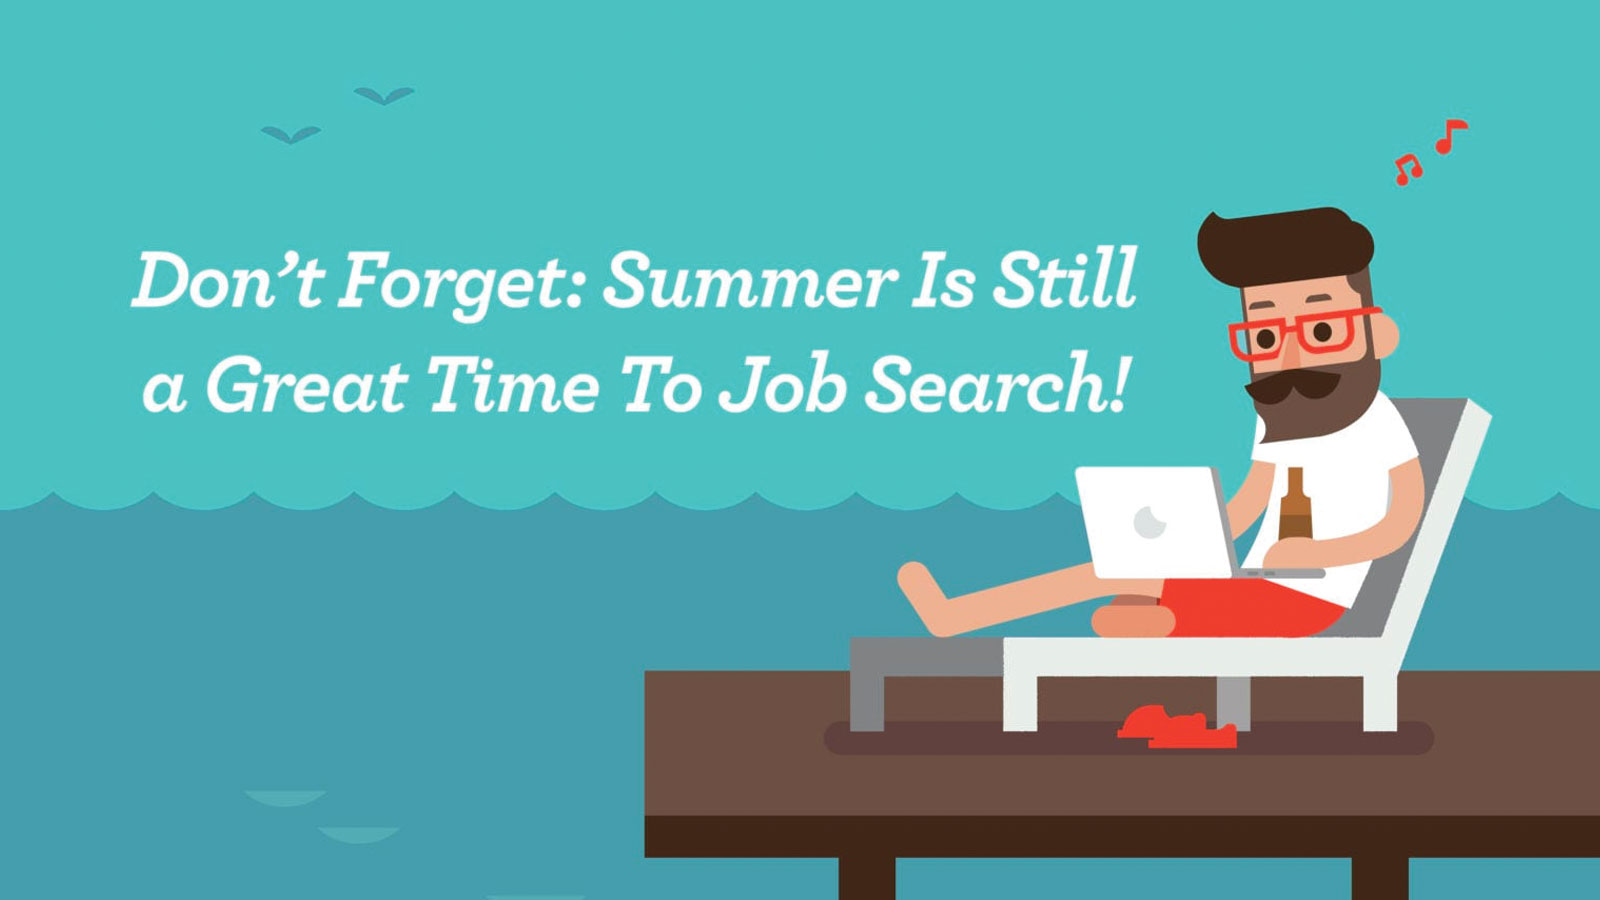 Job Search in the Summer. Job Search advice